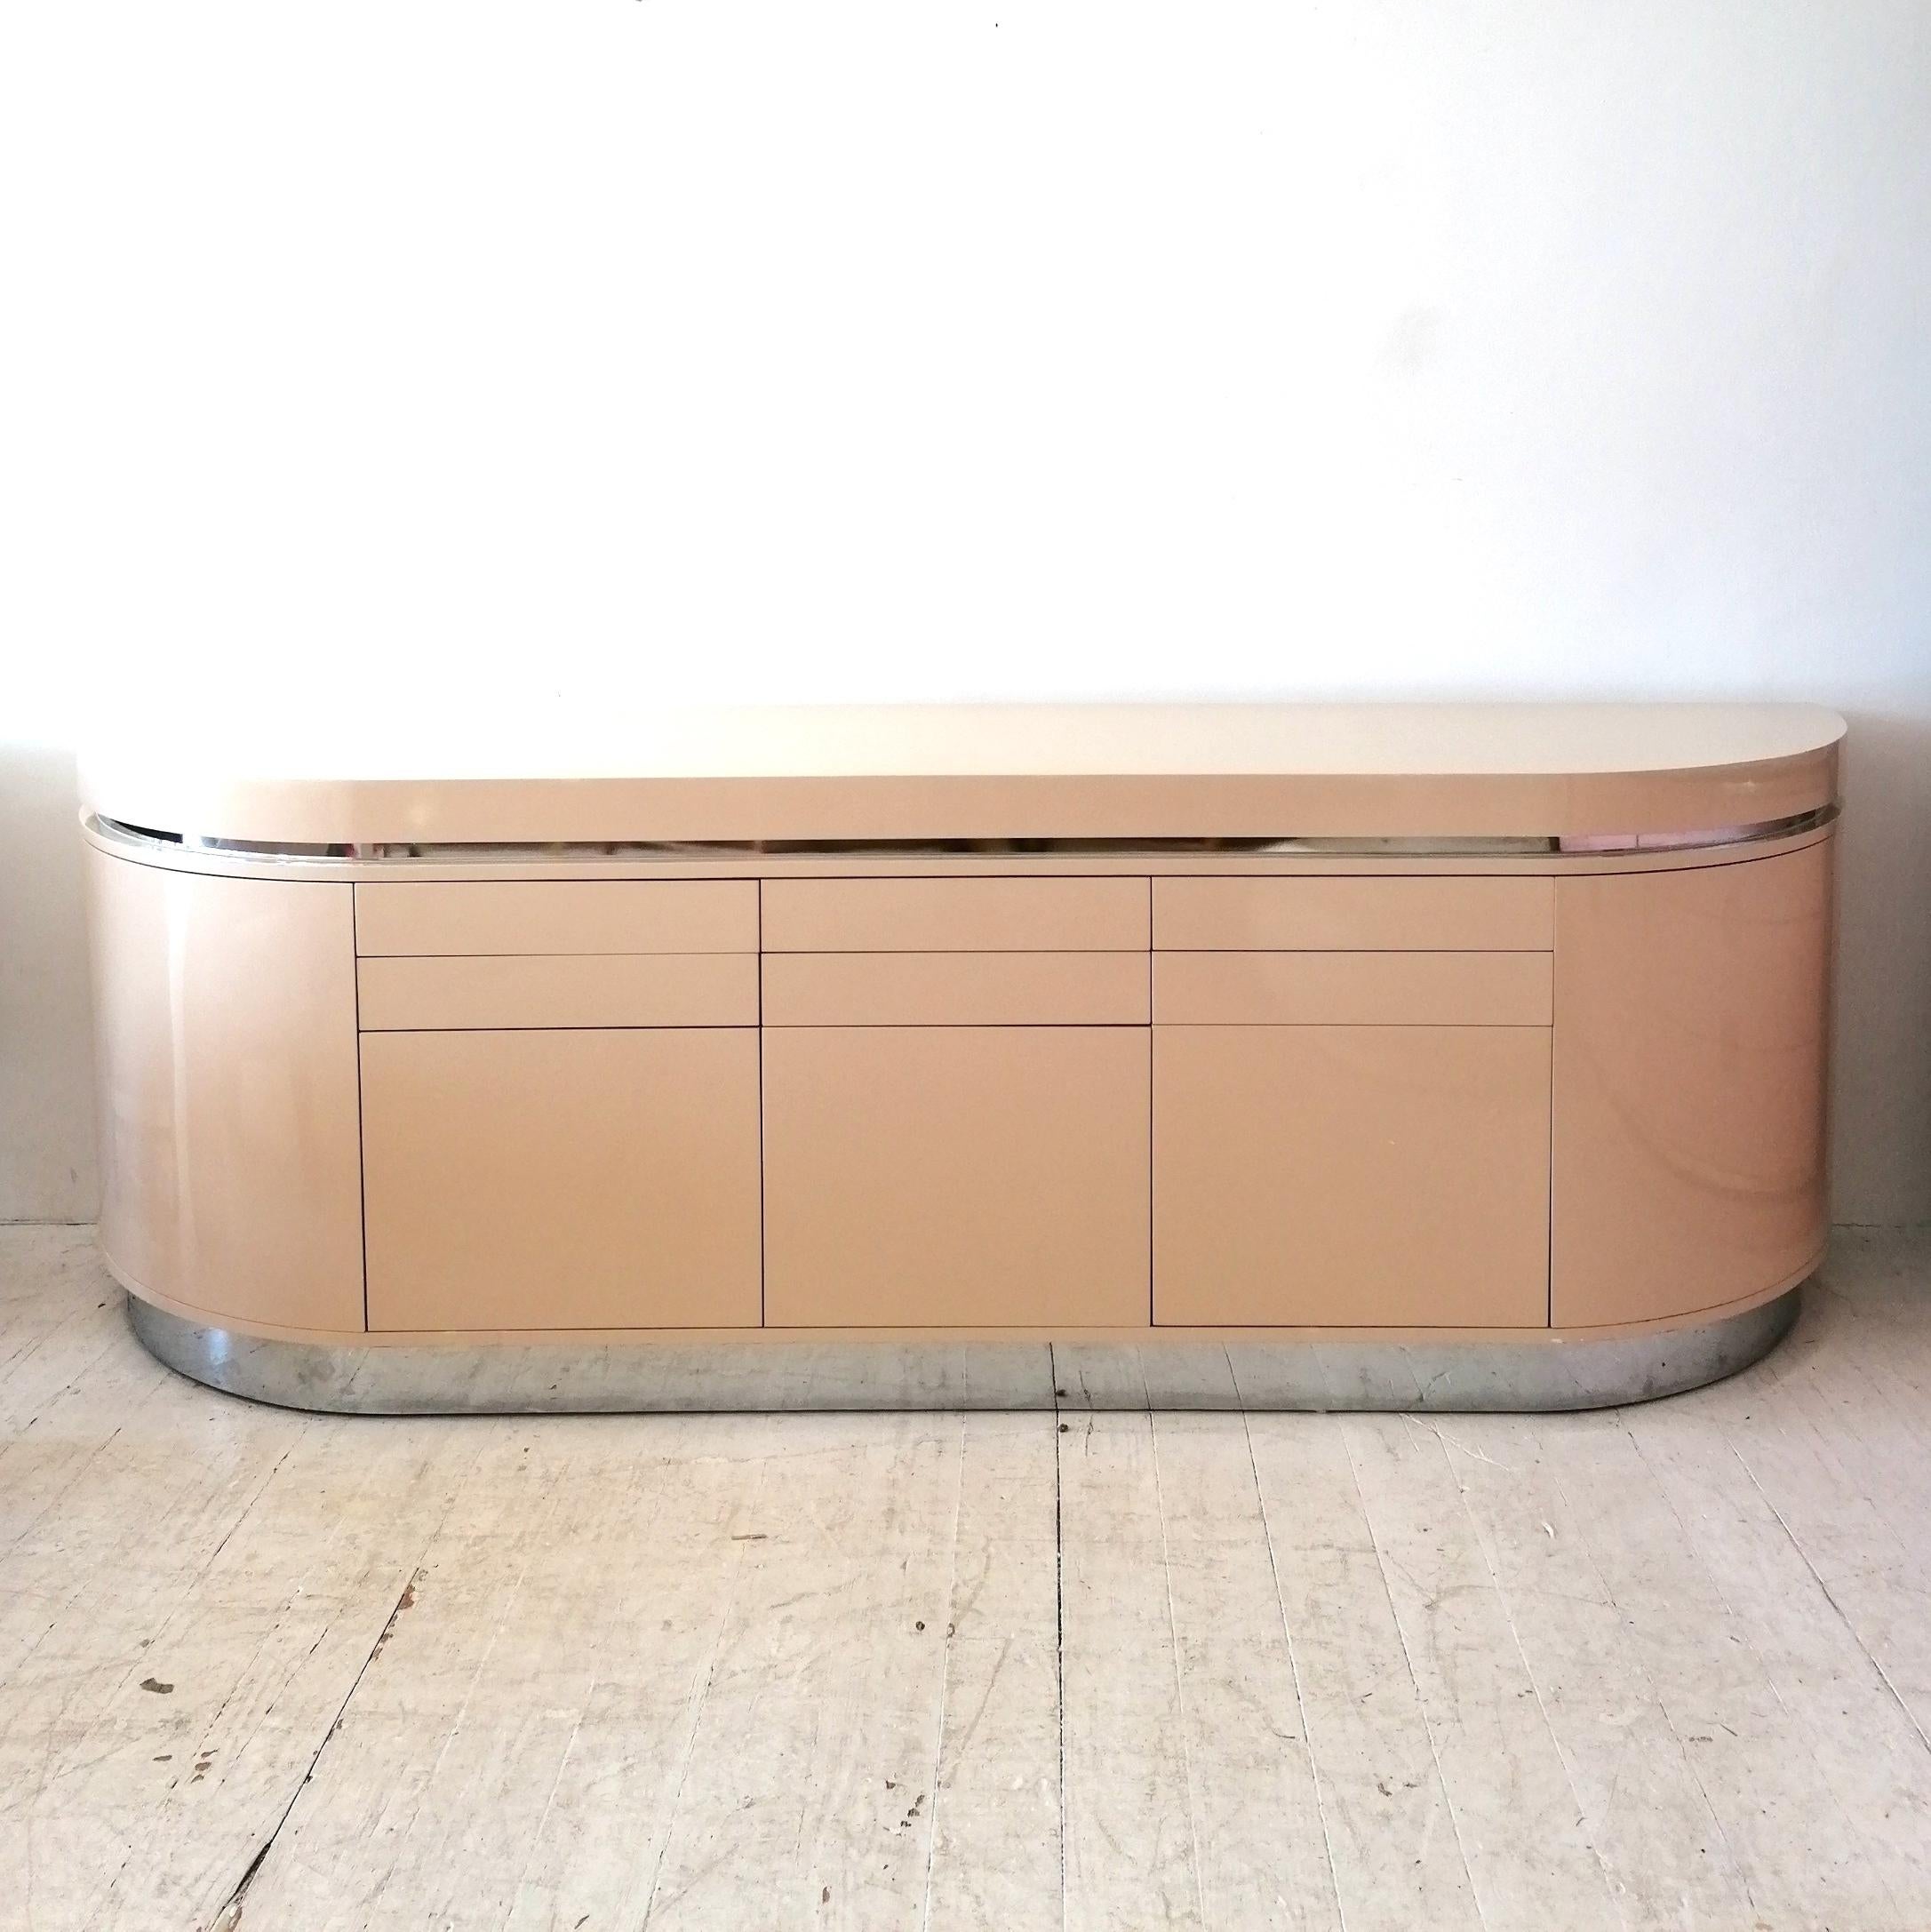 A substantial & super quality deep warm cream lacquer curved demi-lune sideboard by J. Wade Beam for Brueton, USA, 1980s. An excellent example of 80s postmodern deco revival design. Adding to the streamlined look is an inset band of chromed metal,